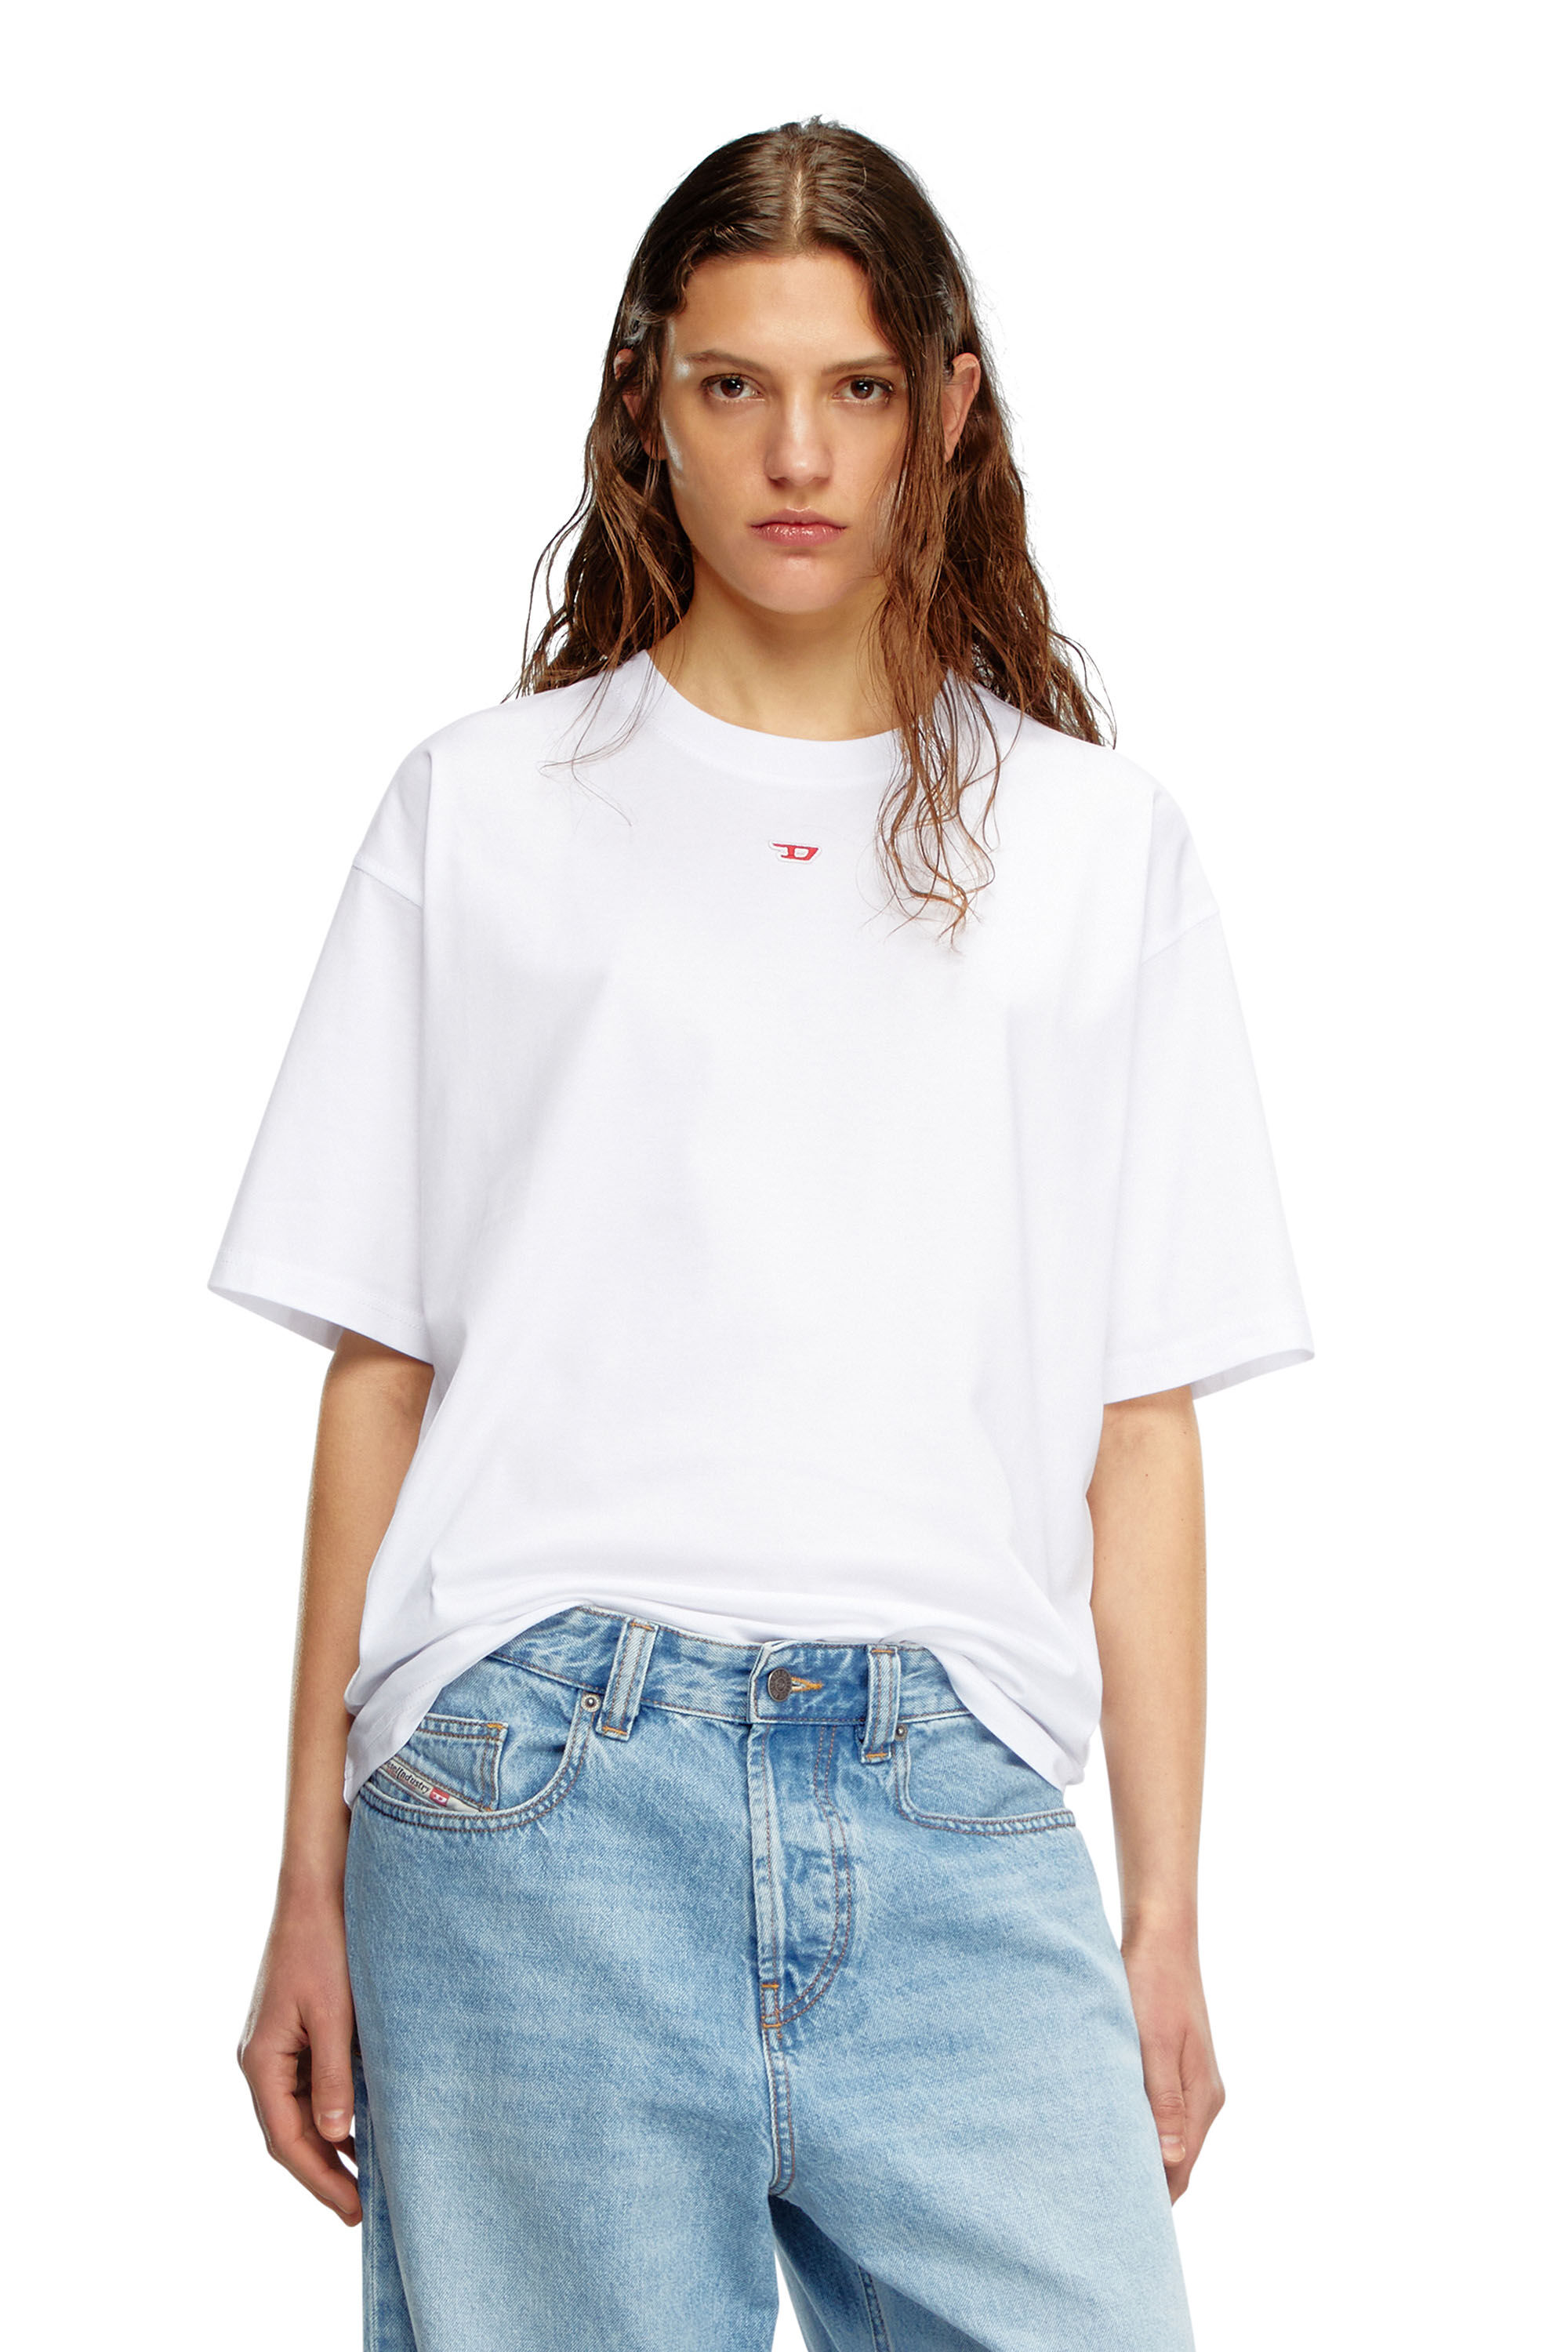 Women's T-shirt with embroidered D patch | White | Diesel